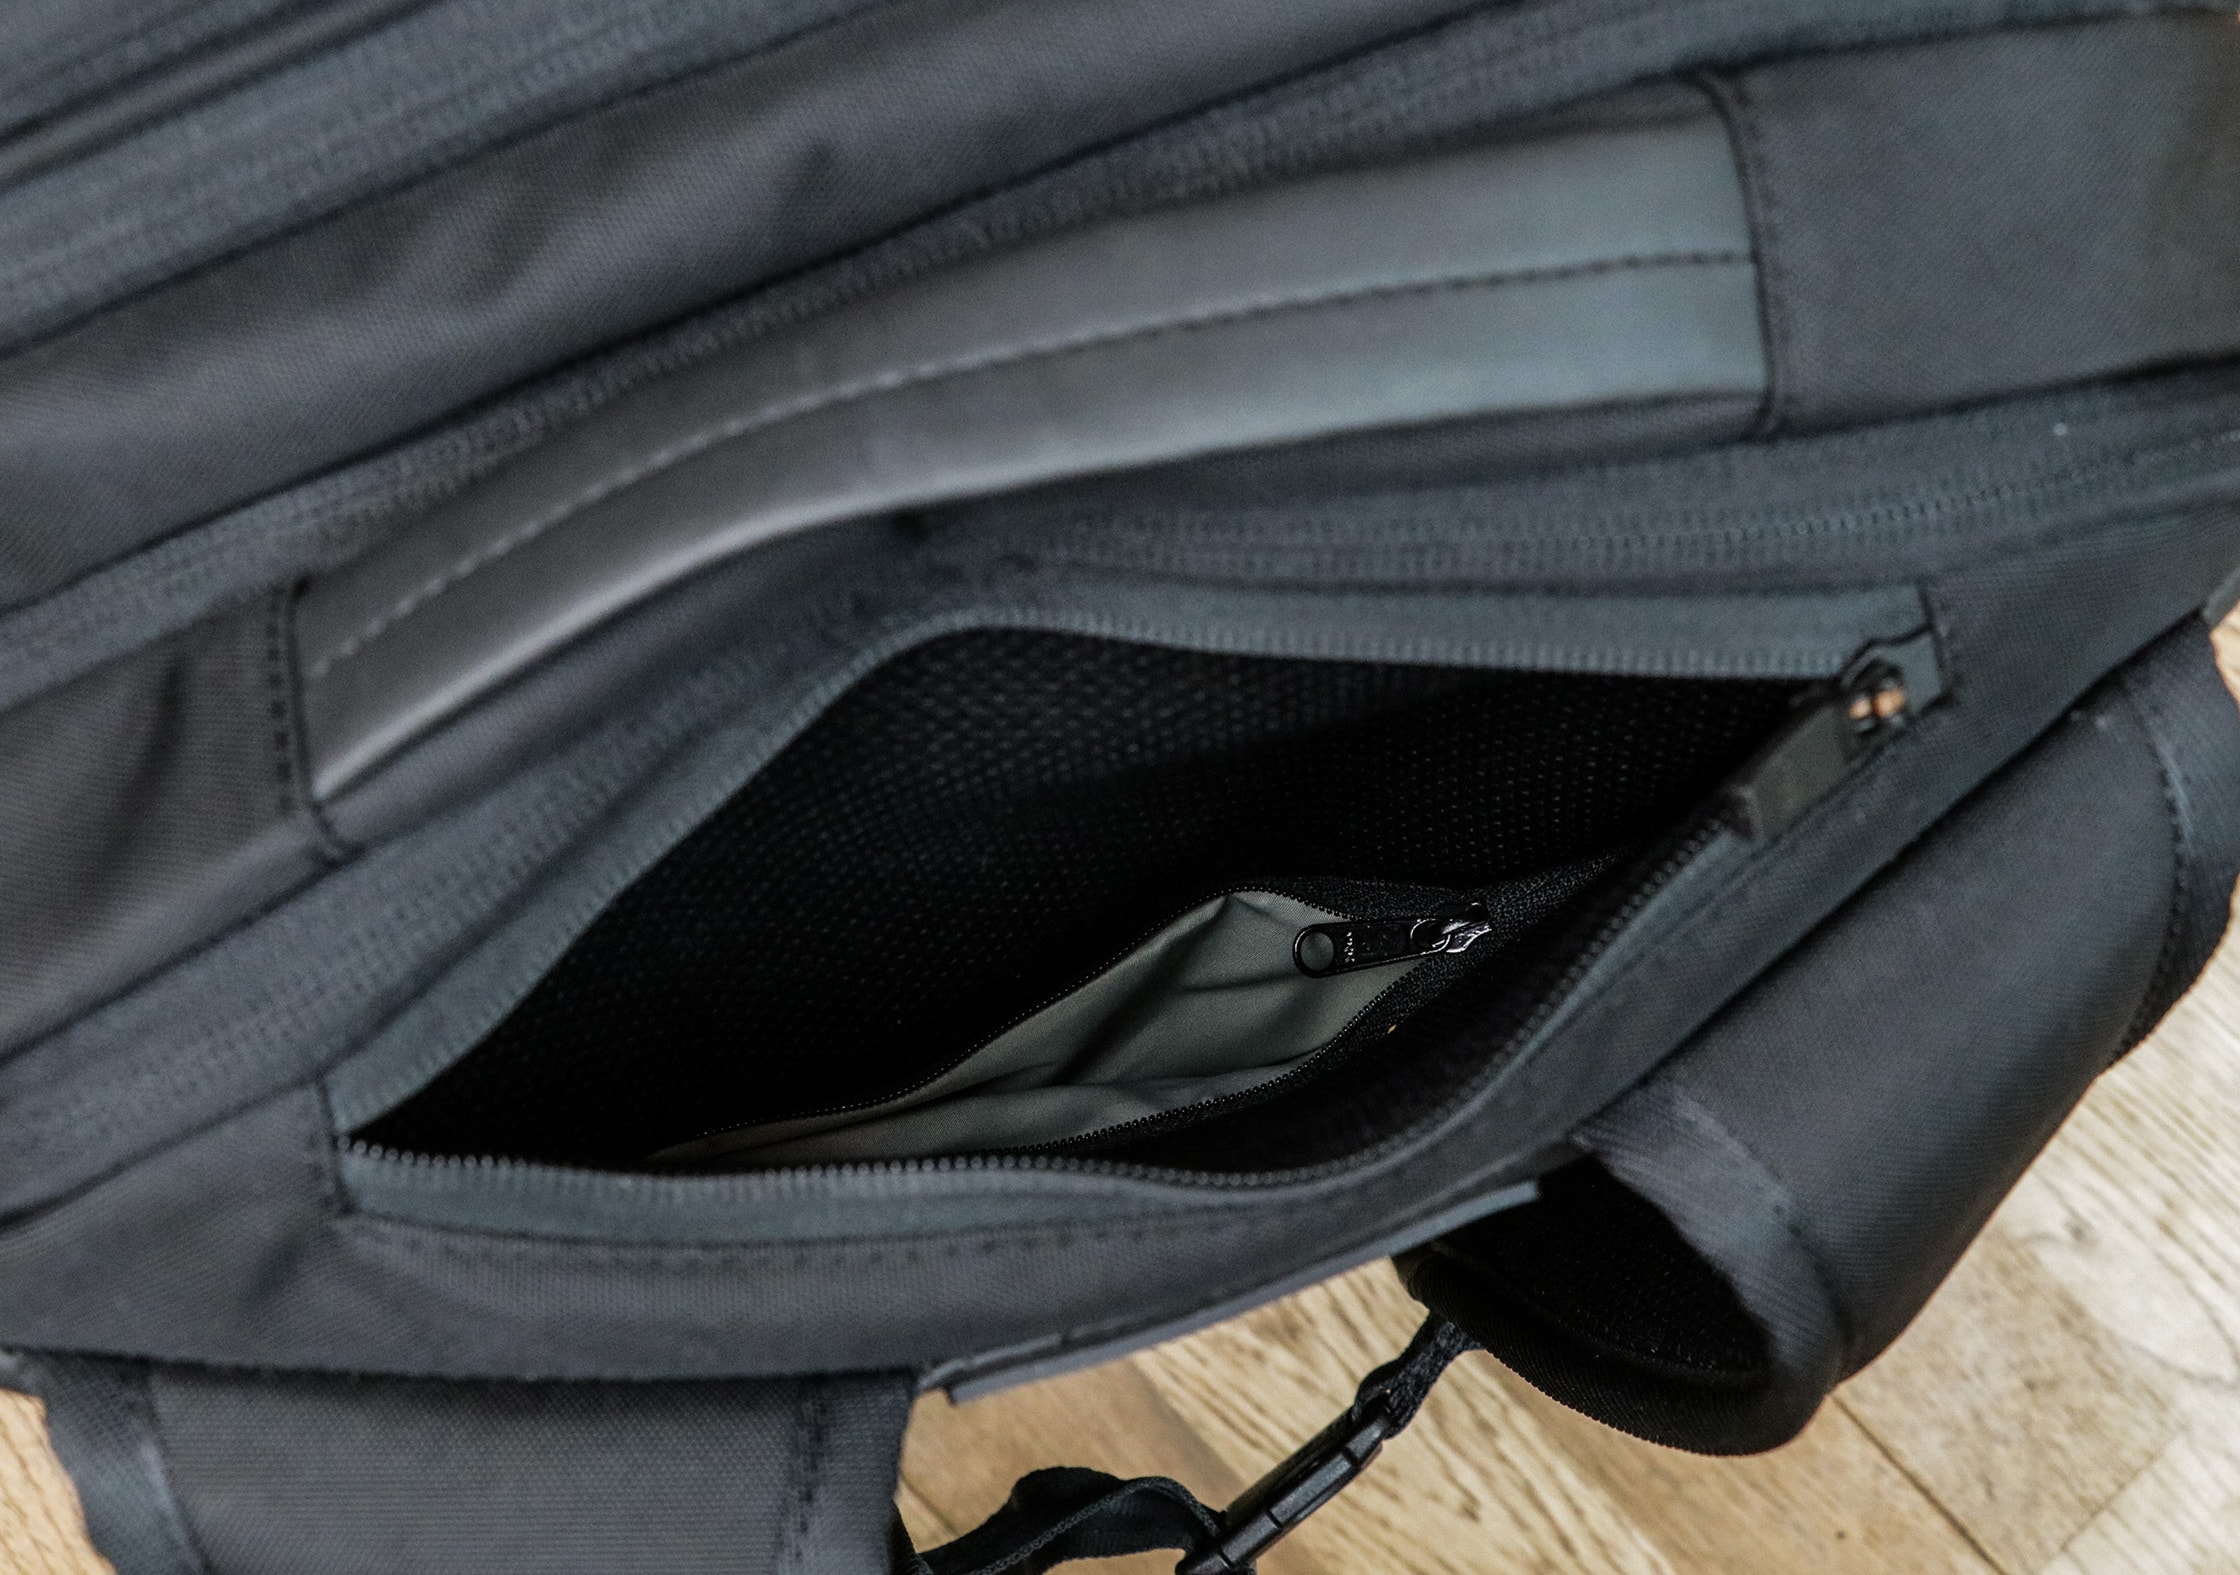 OPPOSETHIS Invisible Carry-On Top-Drop Pocket With A Secret Compartment Beneath